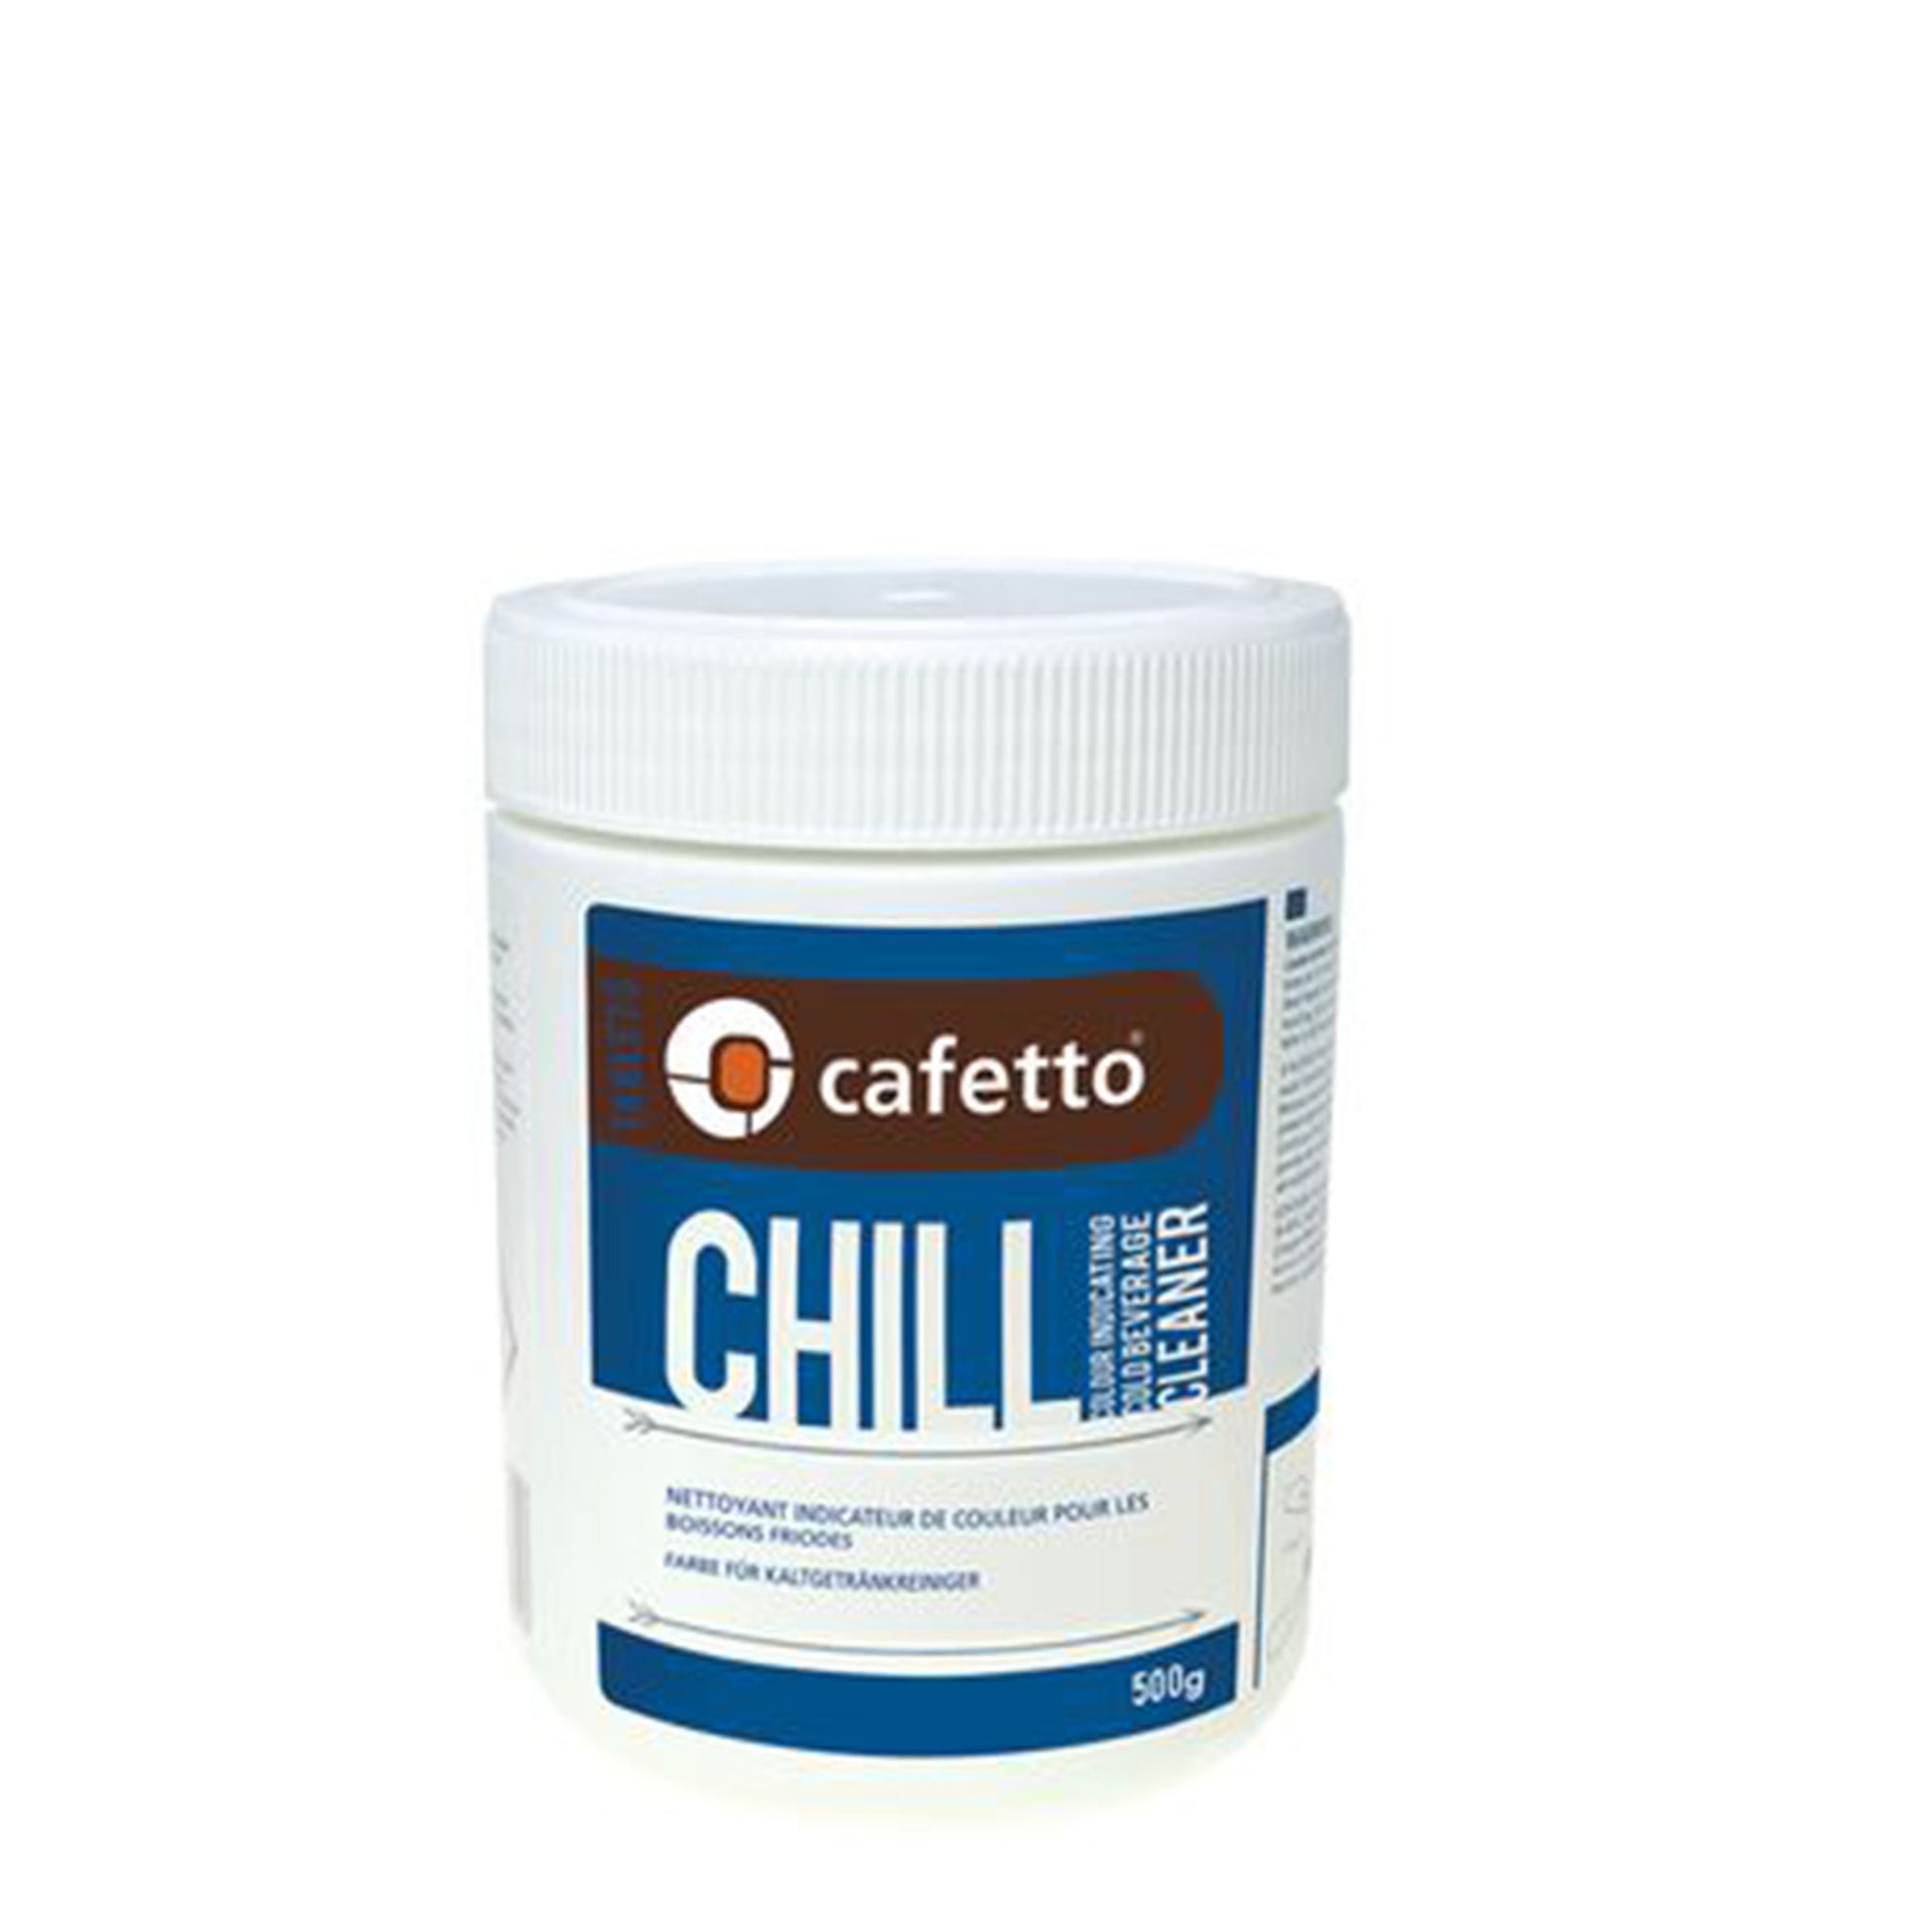 Chill 500g - Cafetto